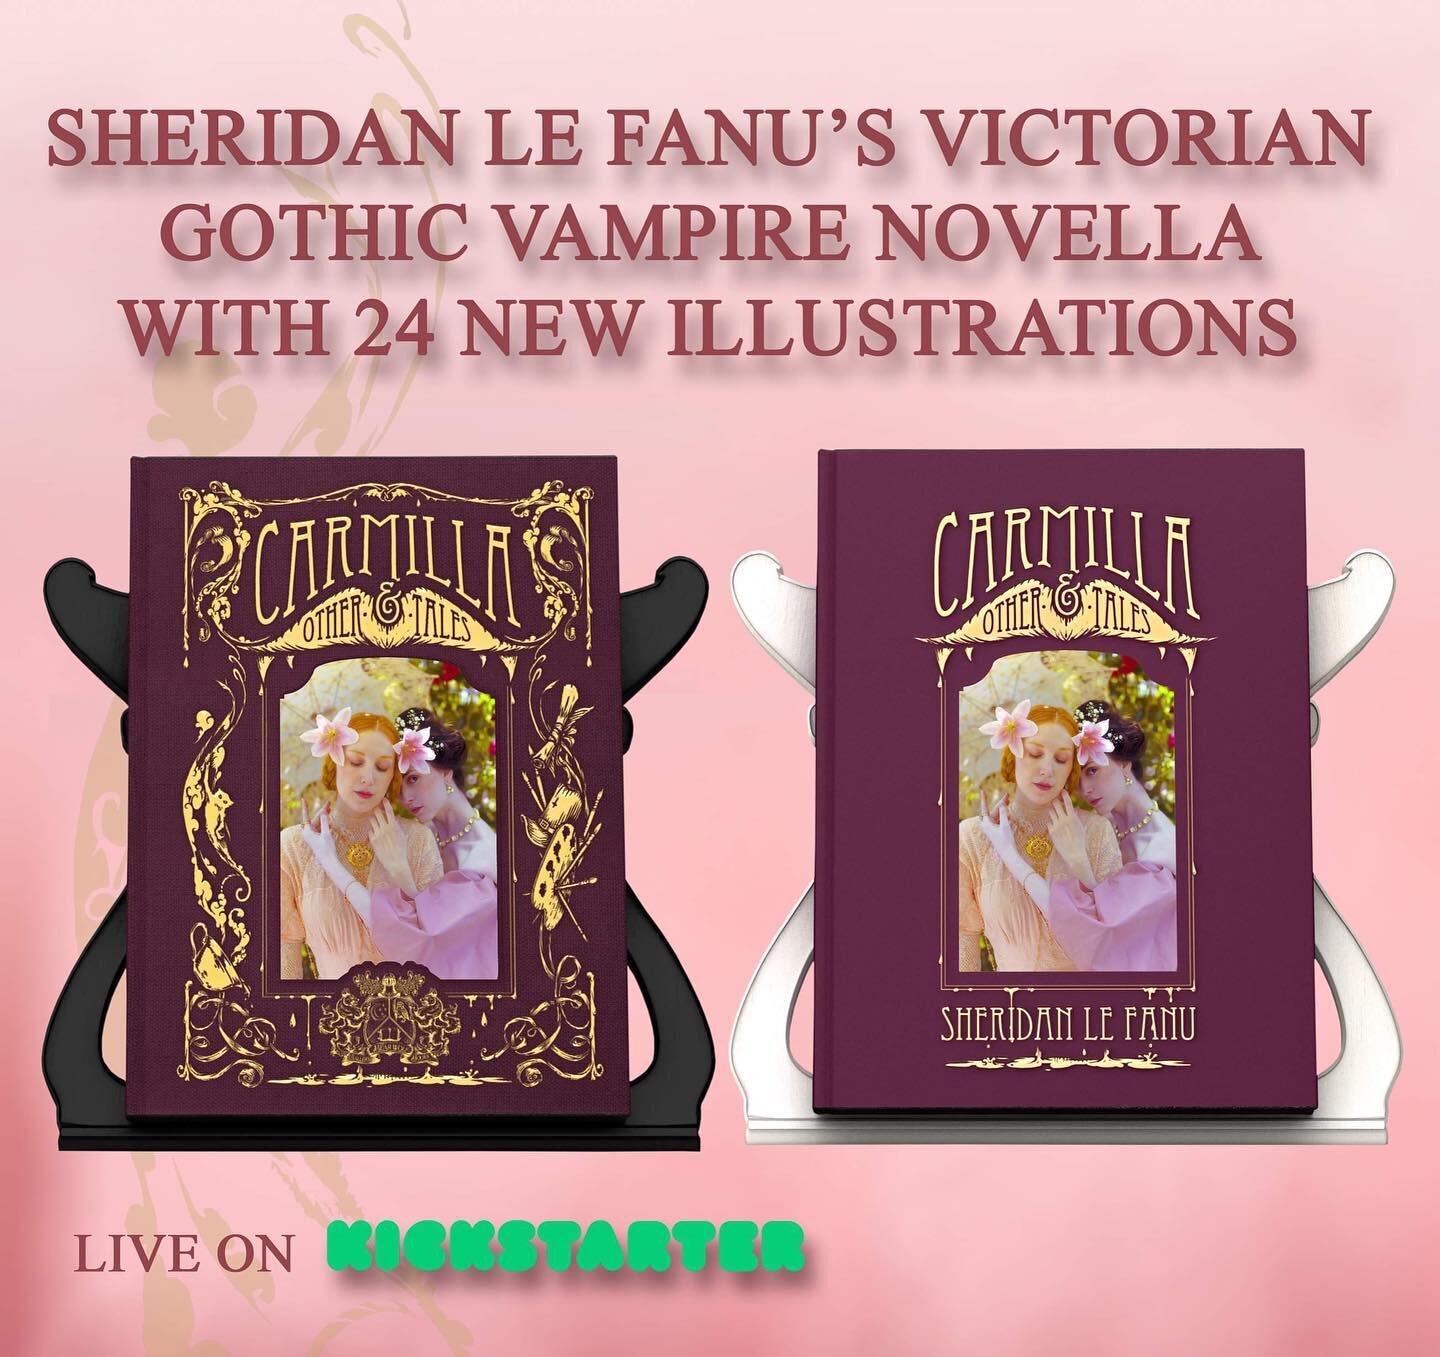 ✨Less than 24 hours to pledge!  Order your copy of Carmilla &amp; Other Tales today!✨
.
#projectswelove #carmilla #vampireromance #vampire #victoriangothic #novella #historicalromancenovel #sheridanlefanu #booksbooksbooks📚 #collectorsedition #hardco